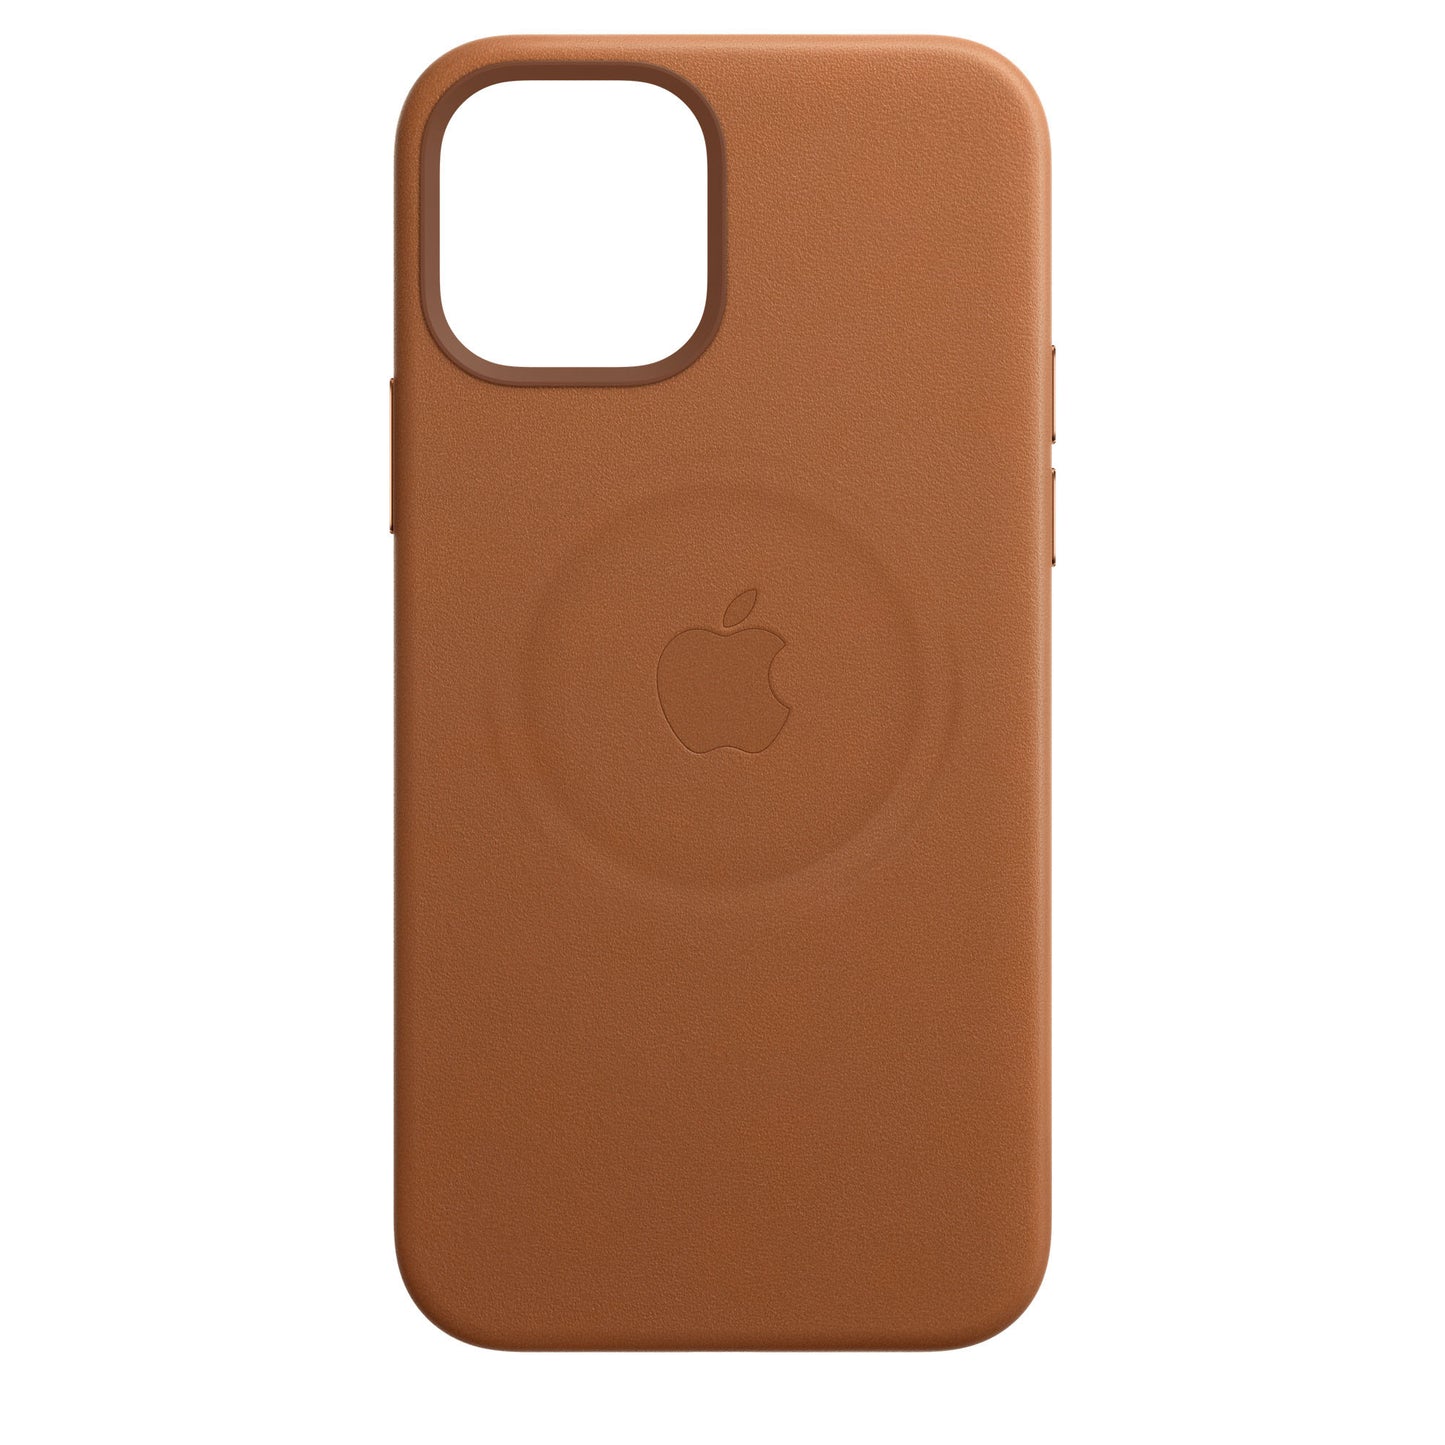 iPhone 12 mini Leather Case with MagSafe - Saddle Brown